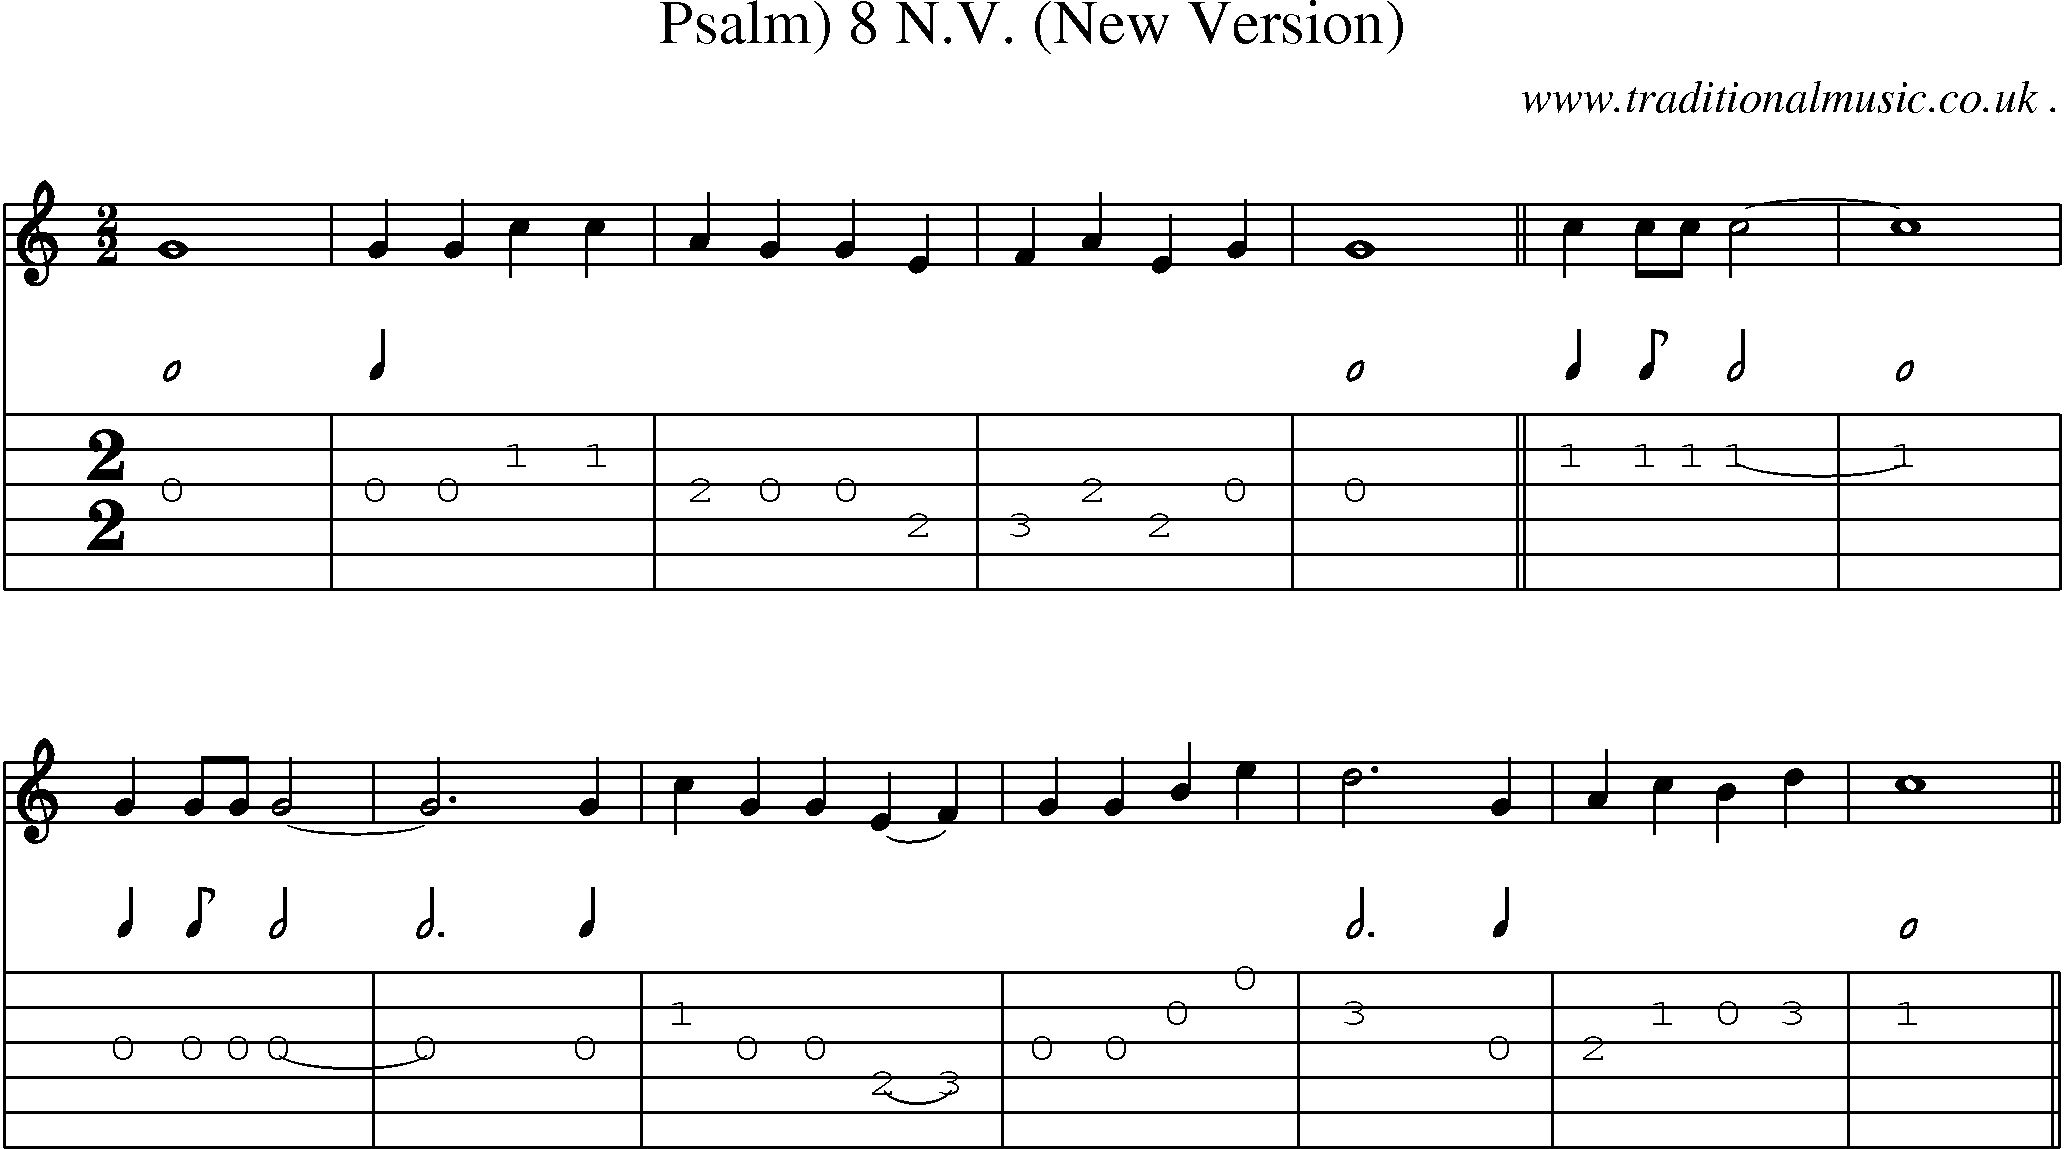 Sheet-Music and Guitar Tabs for Psalm) 8 Nv (new Version)